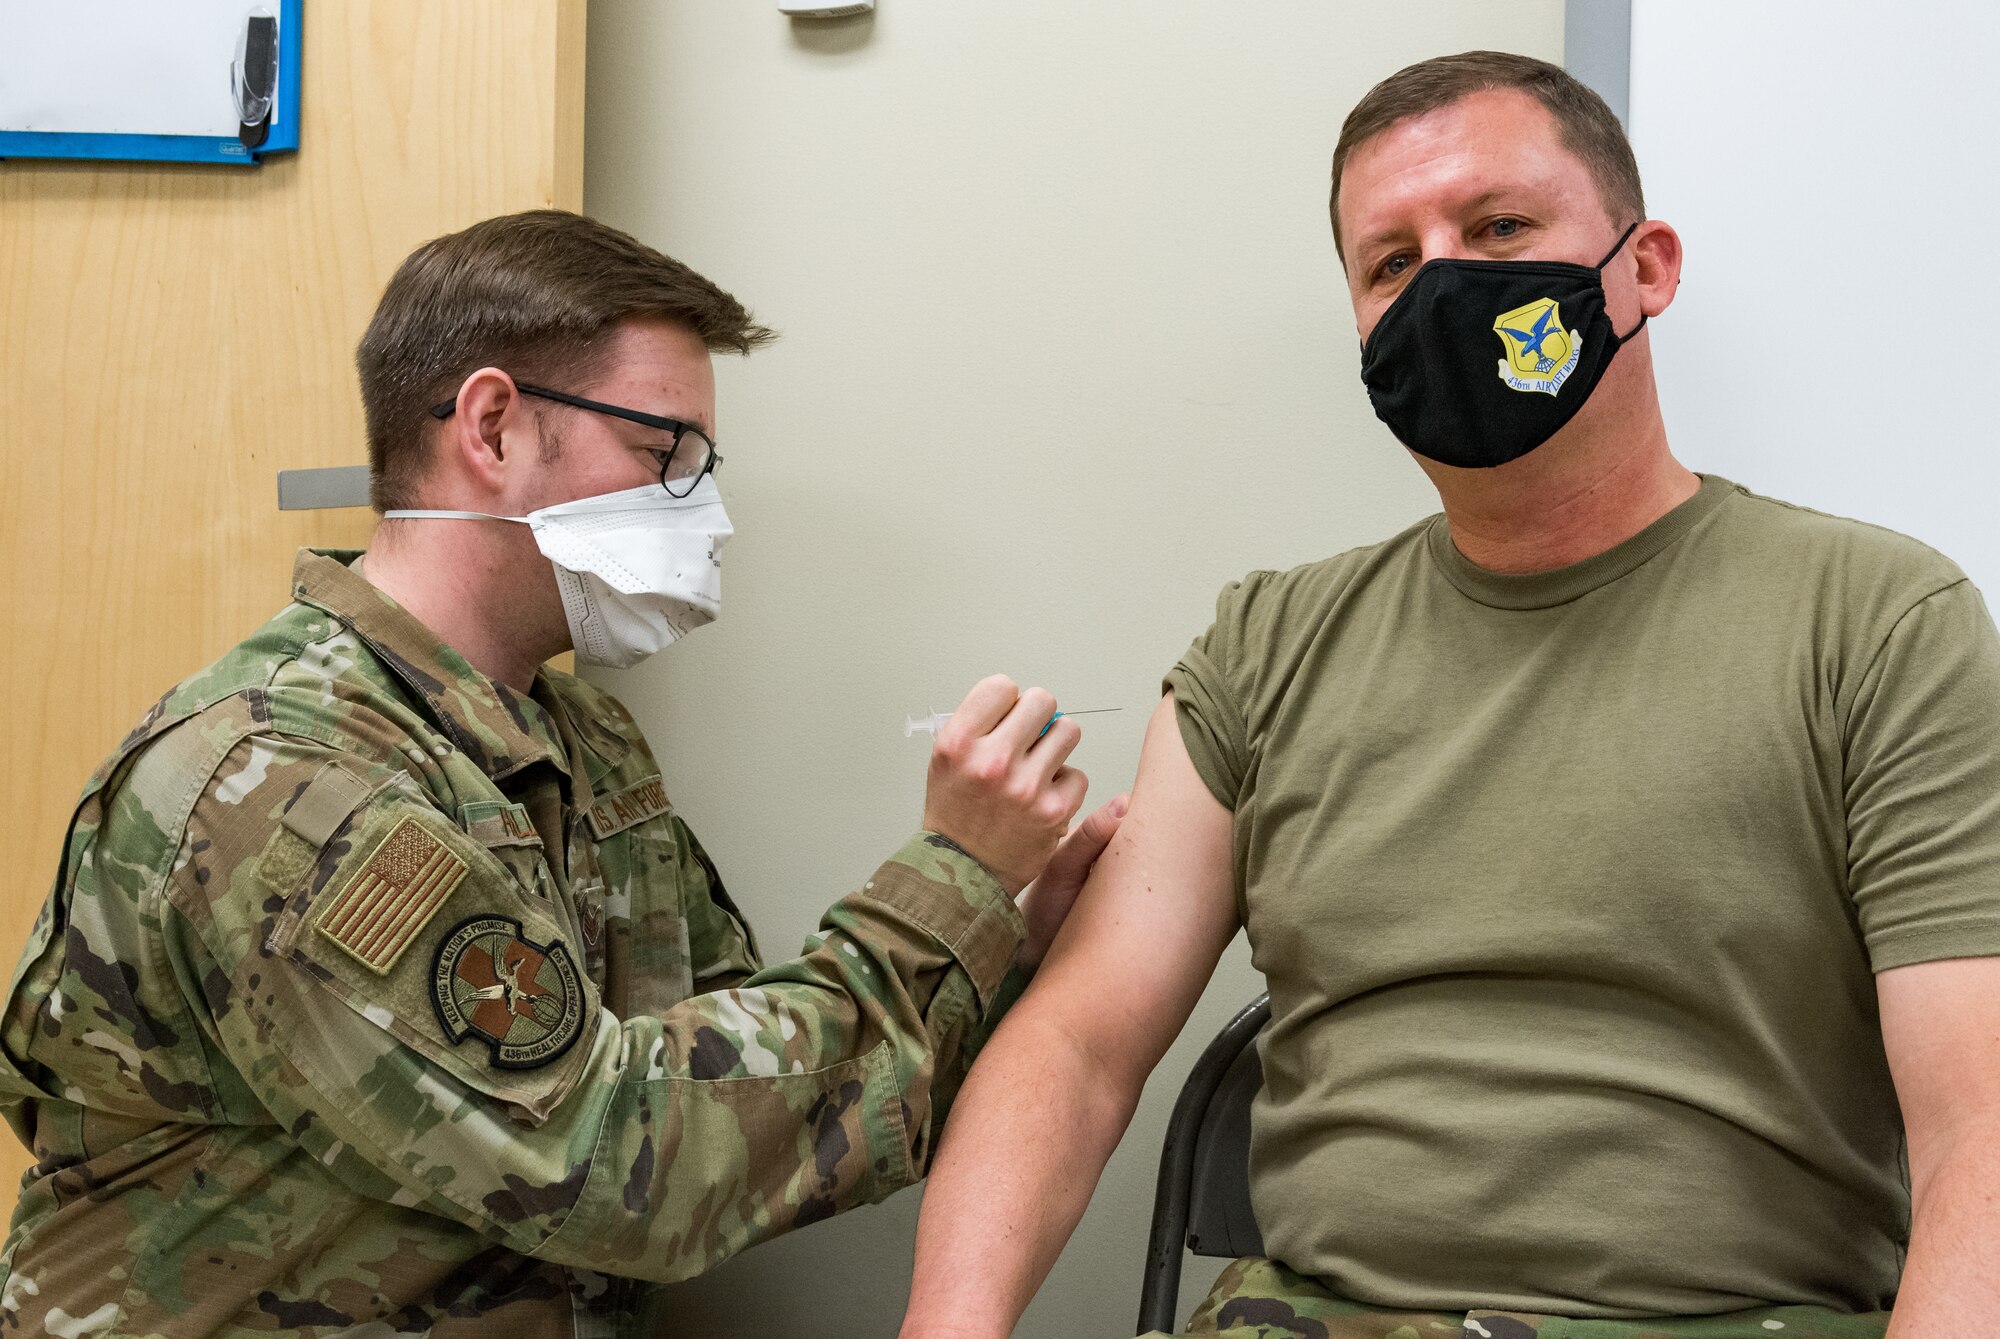 Col. Matthew Jones, 436th Airlift Wing commander, receives the COVID-19 vaccine administered by Staff Sgt. Logan Hallman, 436th Healthcare Operations Squadron education and training noncommissioned officer in charge, Jan. 22, 2021, at Dover Air Force Base, Delaware. Jones was among the first Team Dover senior leaders who voluntarily received the vaccine in accordance with Department of Defense guidance. (U.S. Air Force photo by Roland Balik)